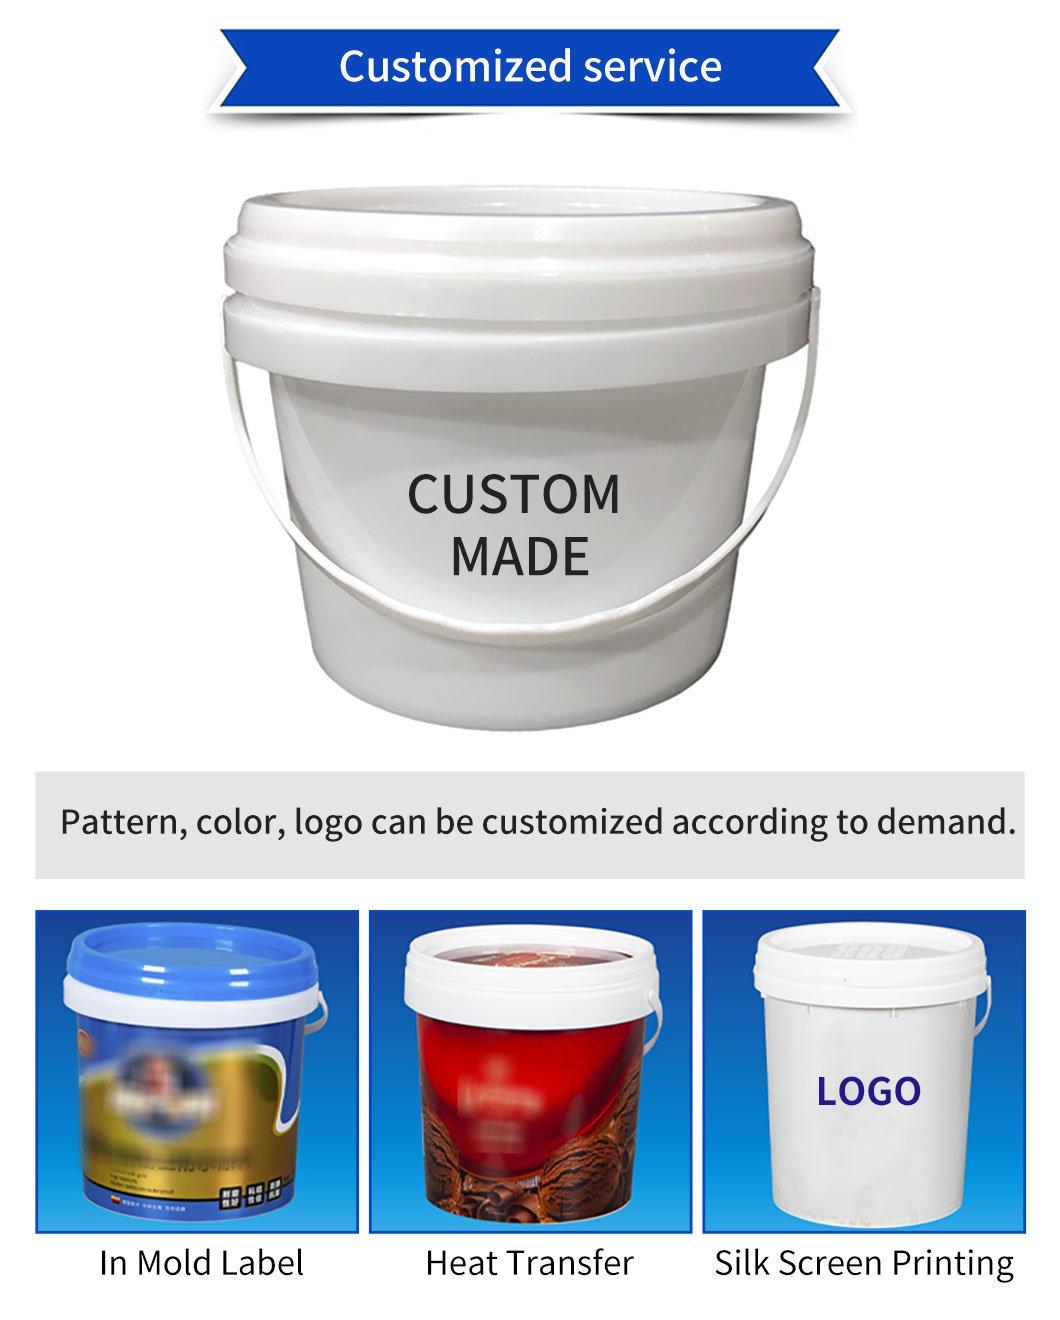 25L Round Large Plastic Bucket with Handles & Lid